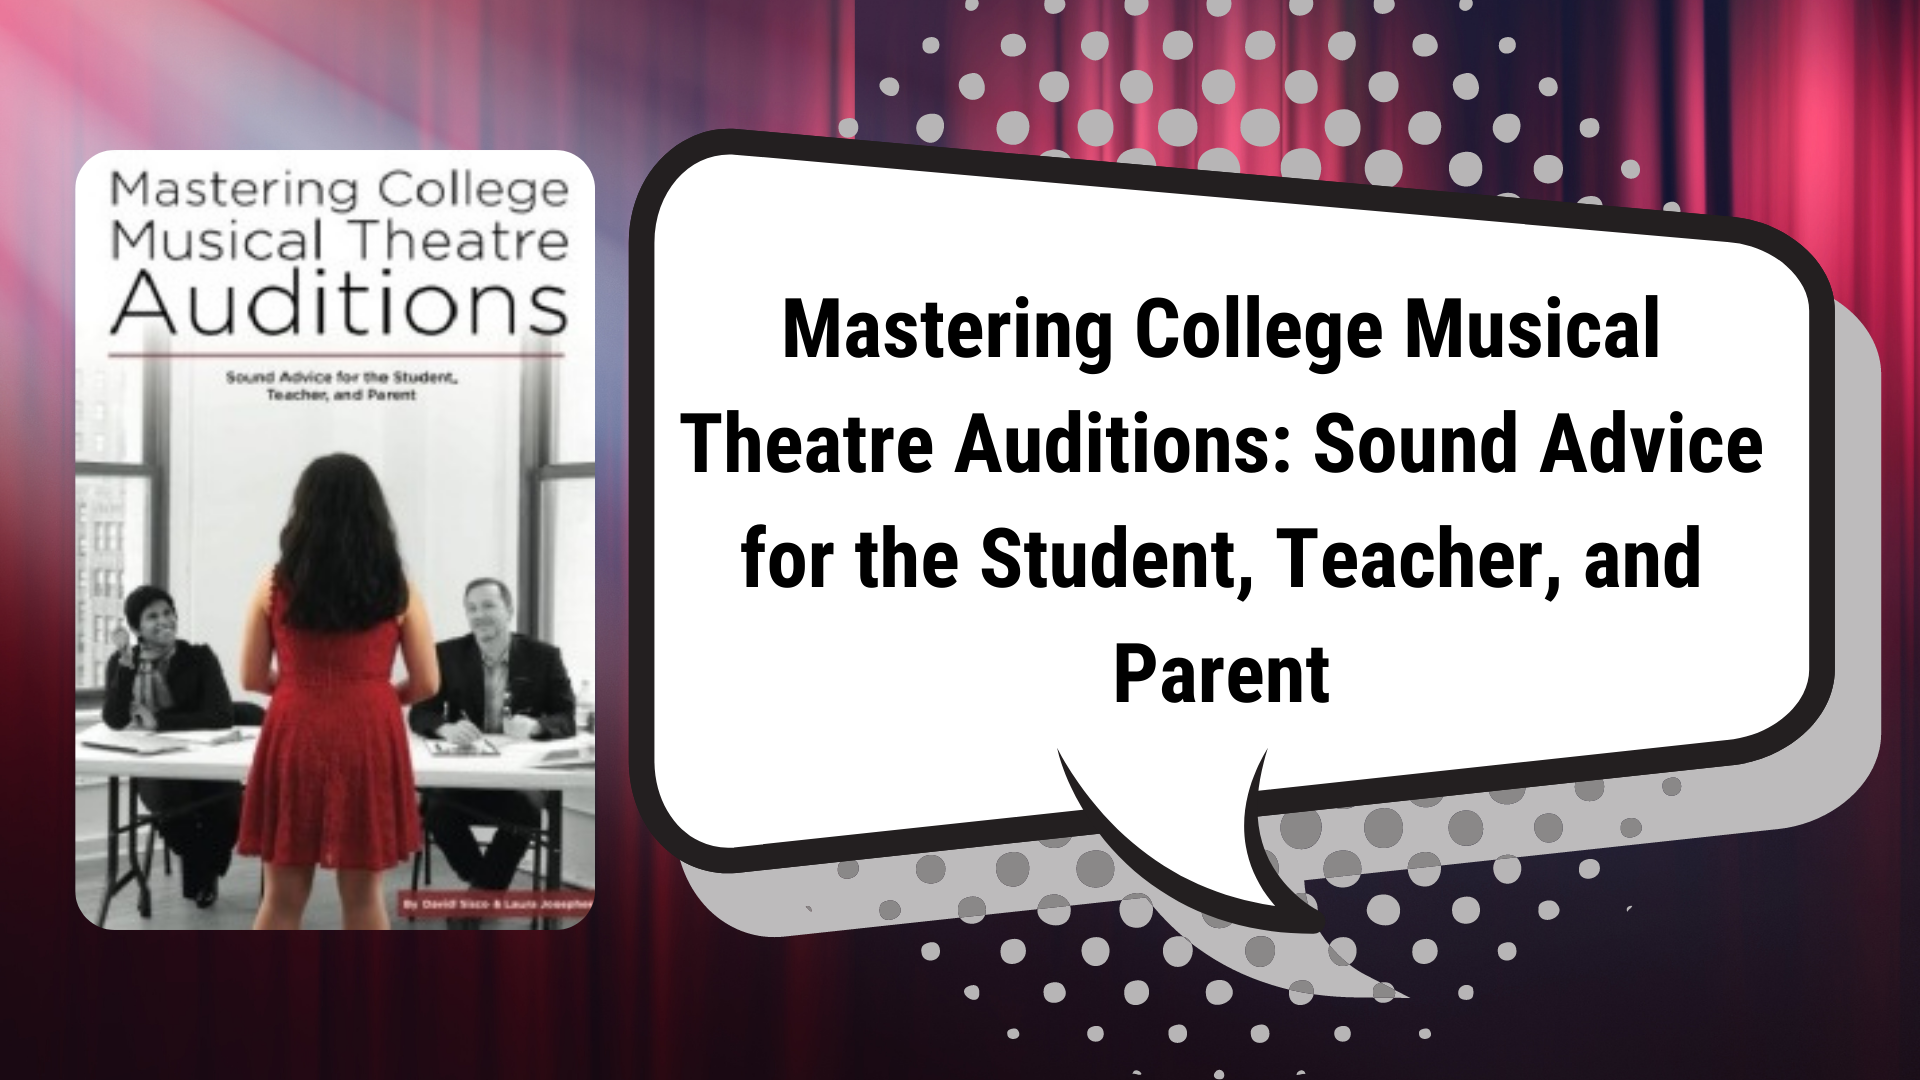 Top Tips on Mastering Your College Musical Theatre Audition!